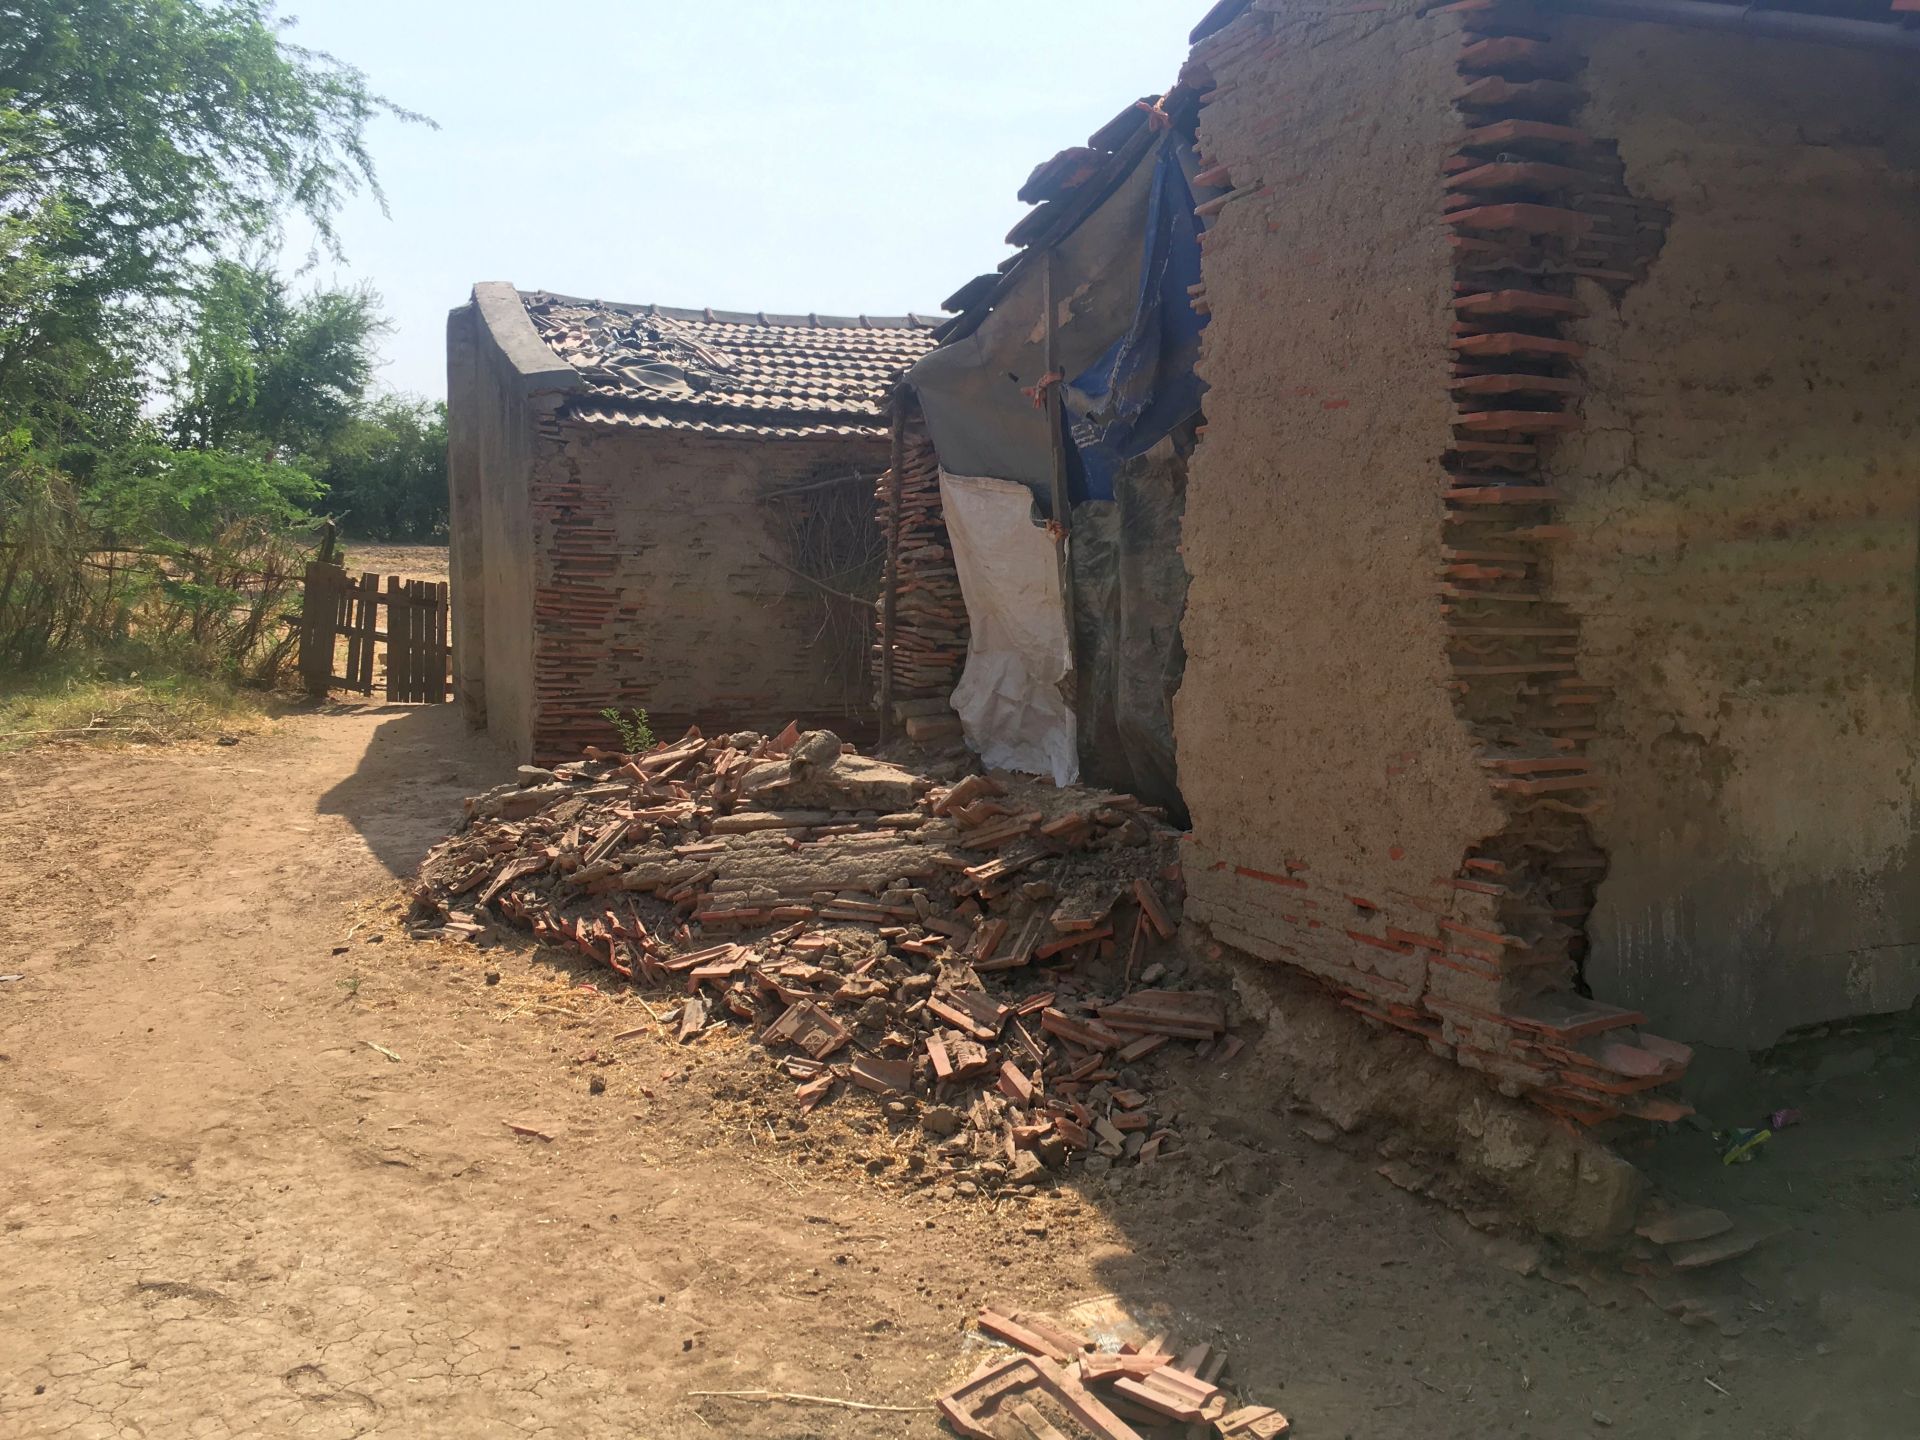 A broken house in Morbi due to 2017 floods that was not rebuilt till 2019 (Image: Chetna Verma)